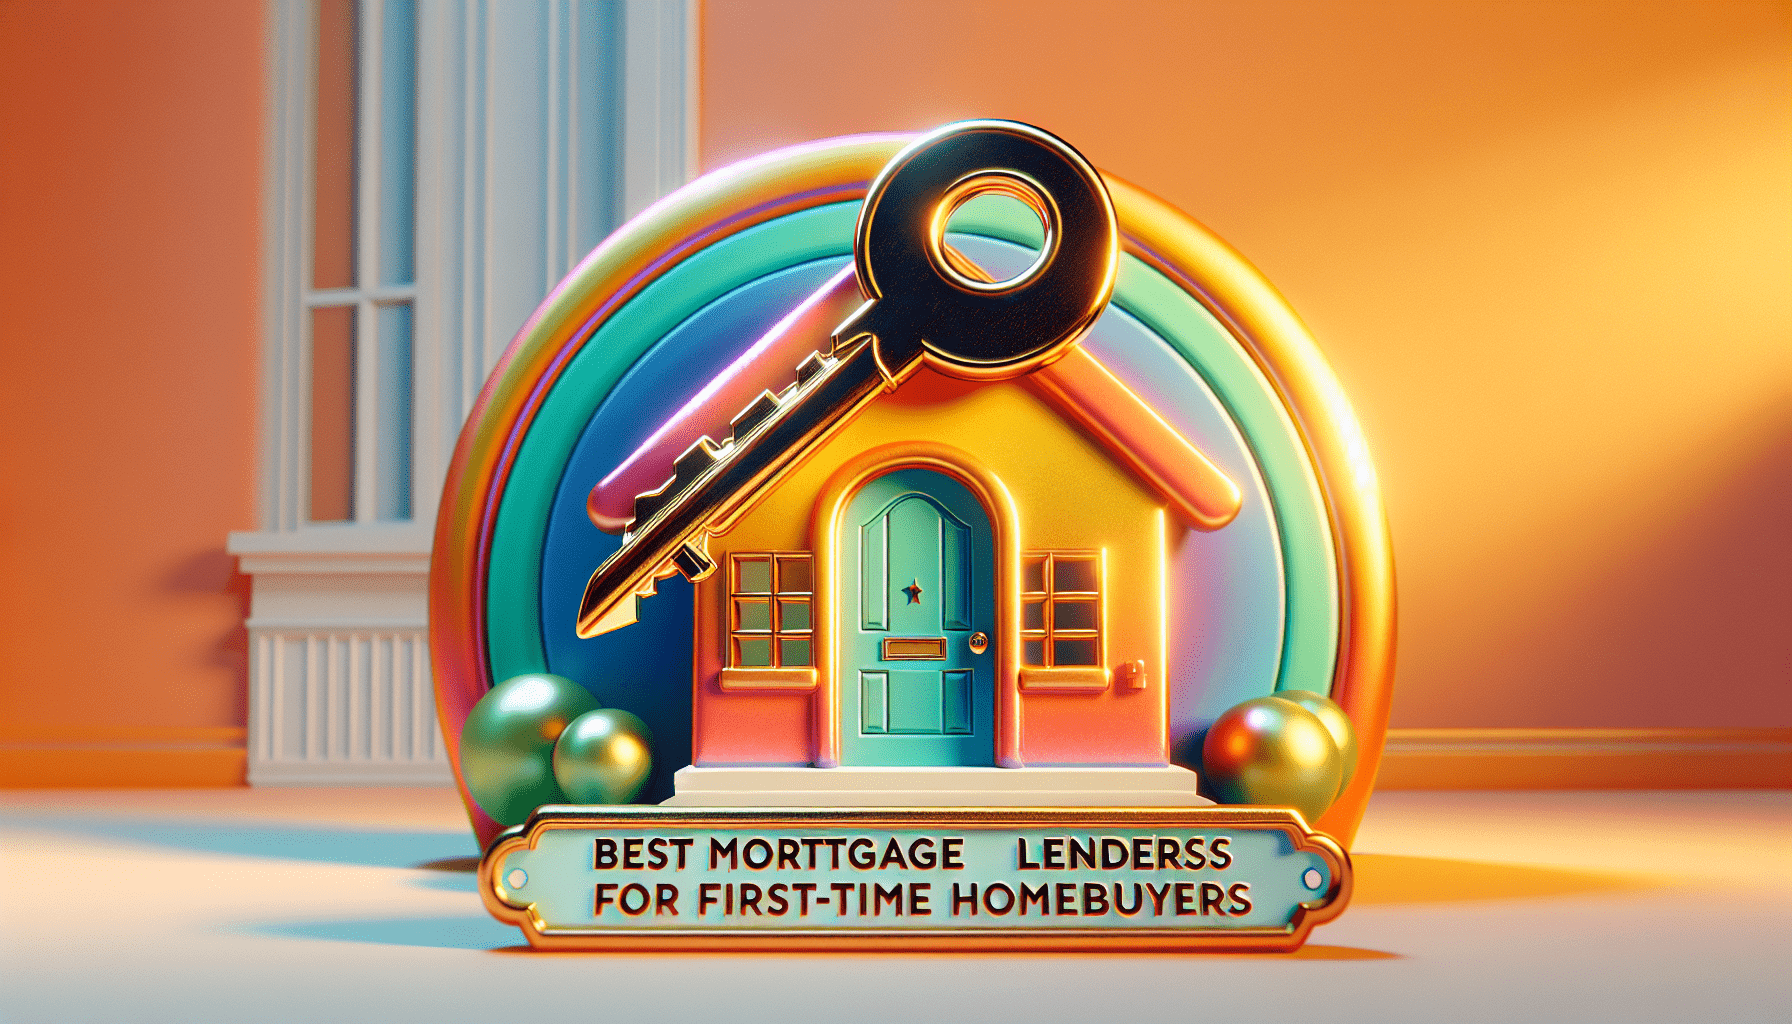 Best Mortgage Lenders For First-time Homebuyers